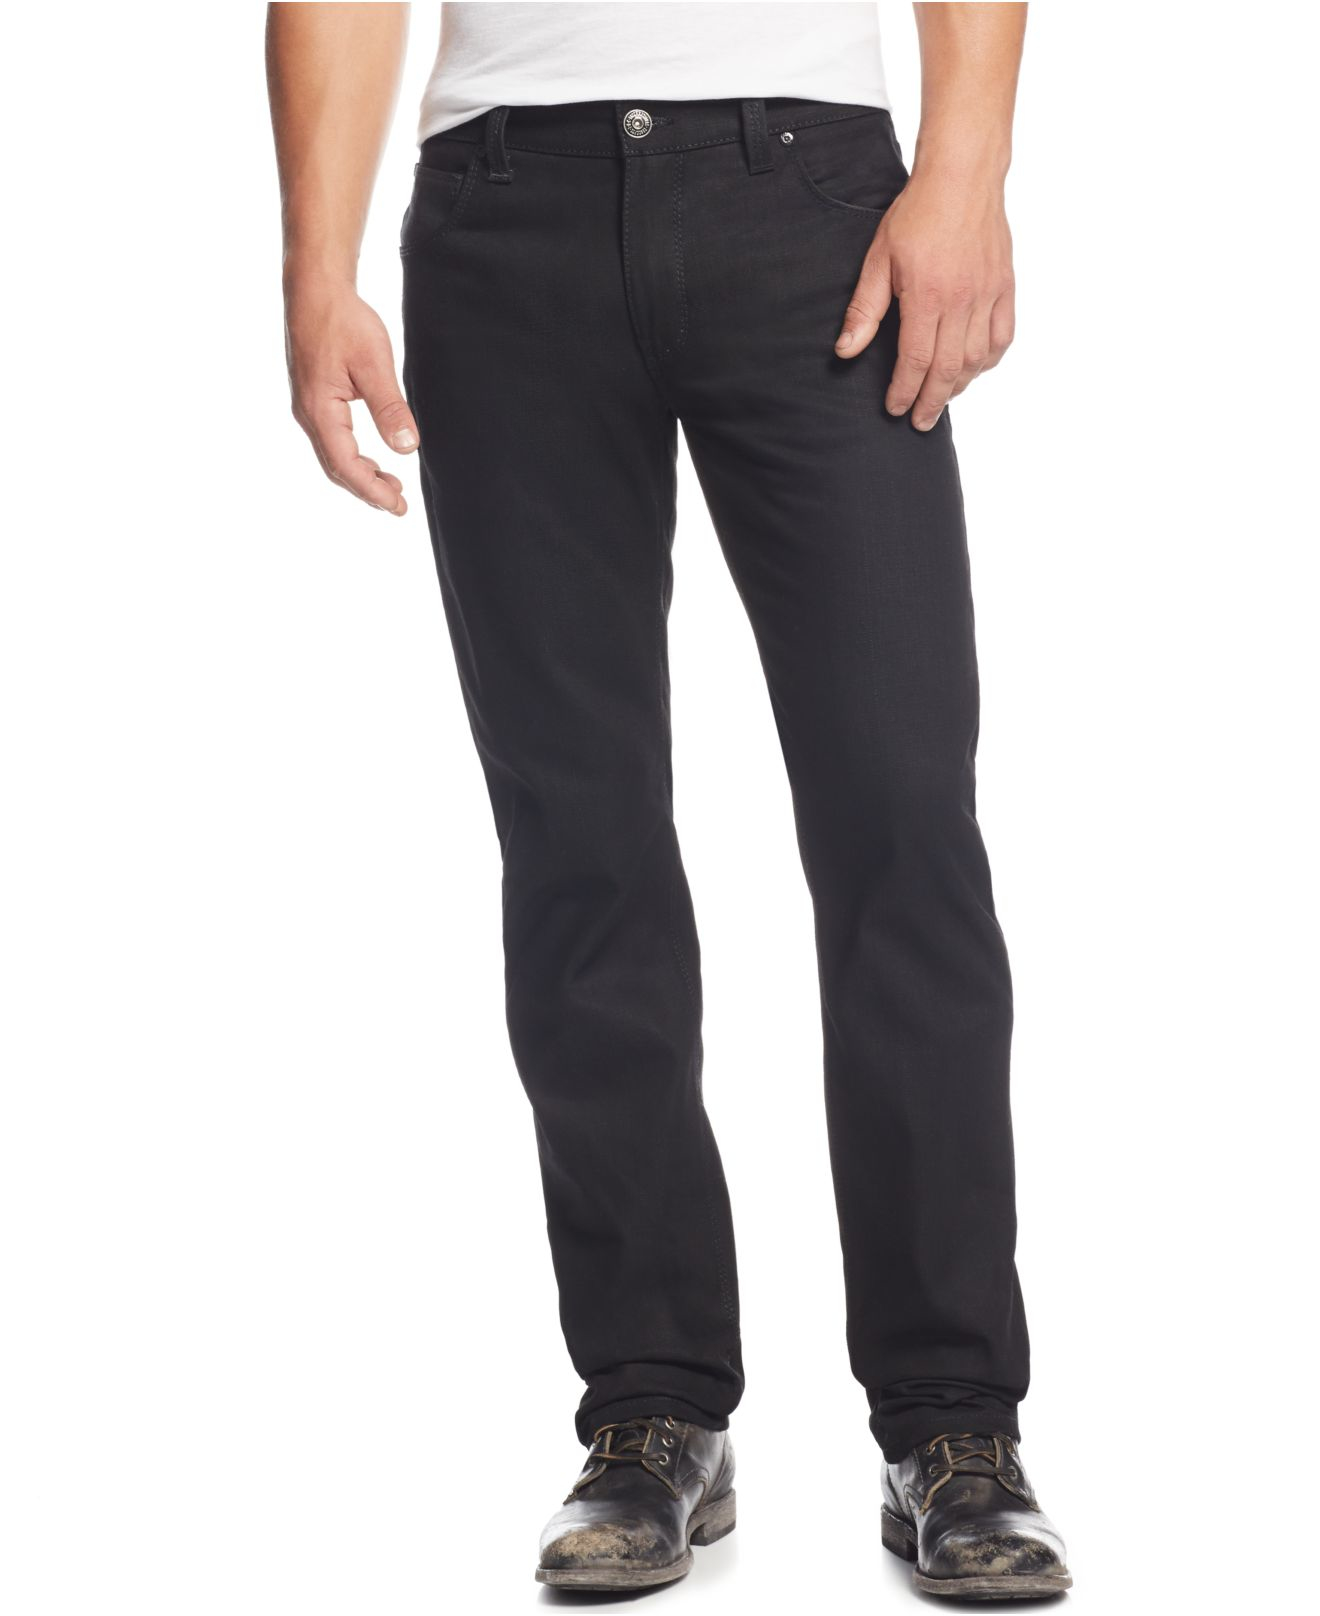 Inc international concepts Big And Tall Jax Slim-fit Jeans in Black for ...